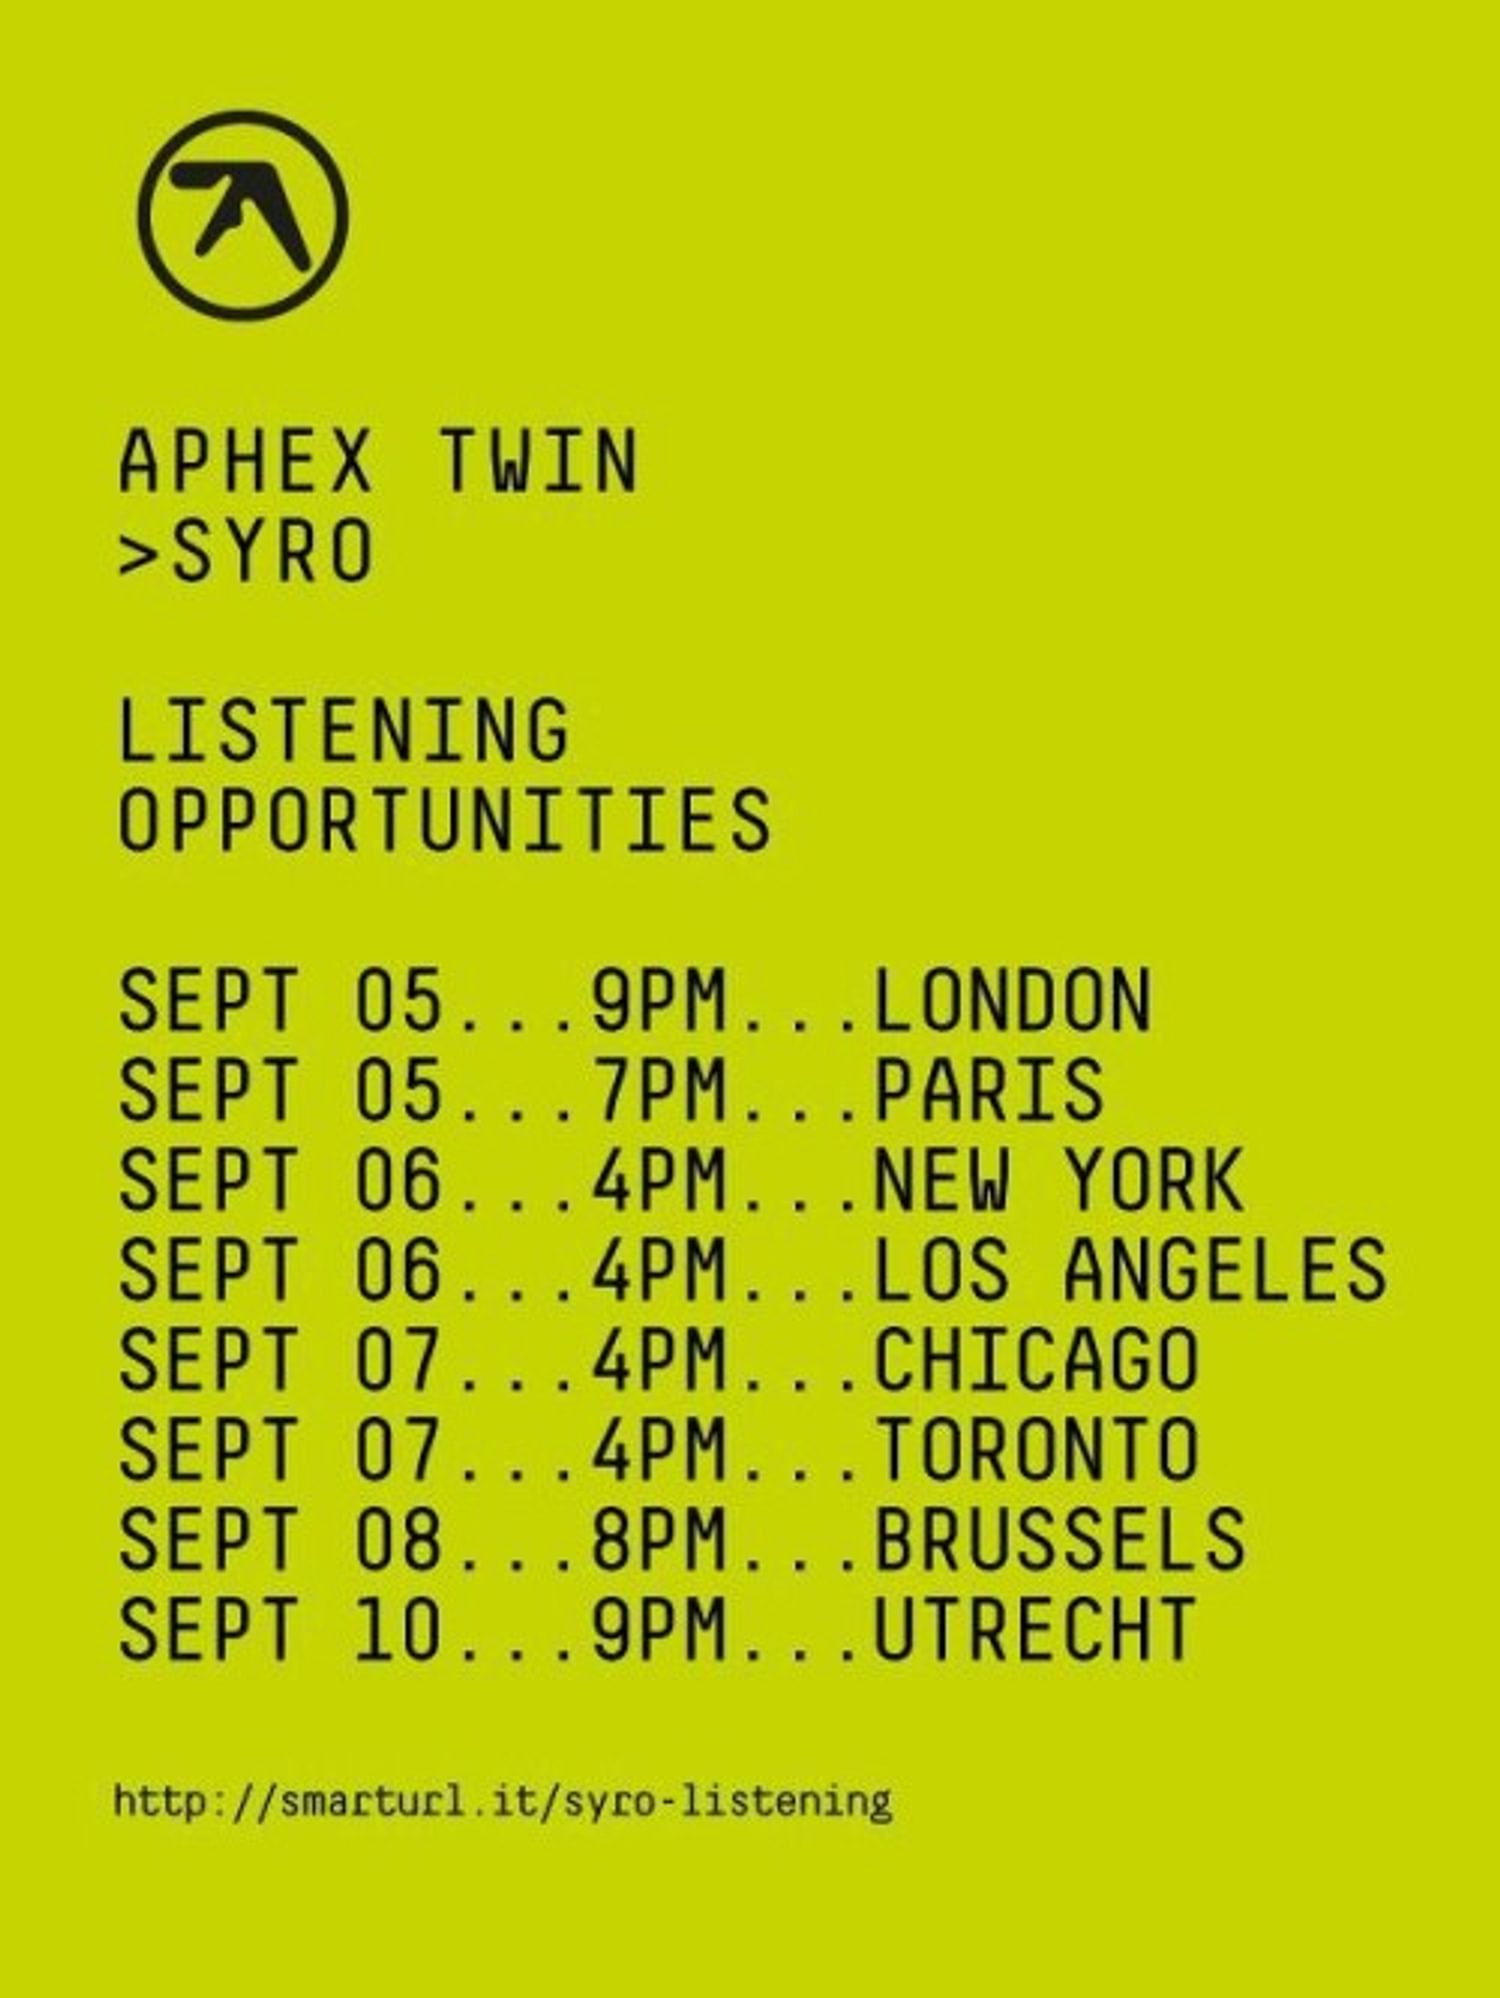 Aphex Twin to host ‘Syro’ listening parties around the world